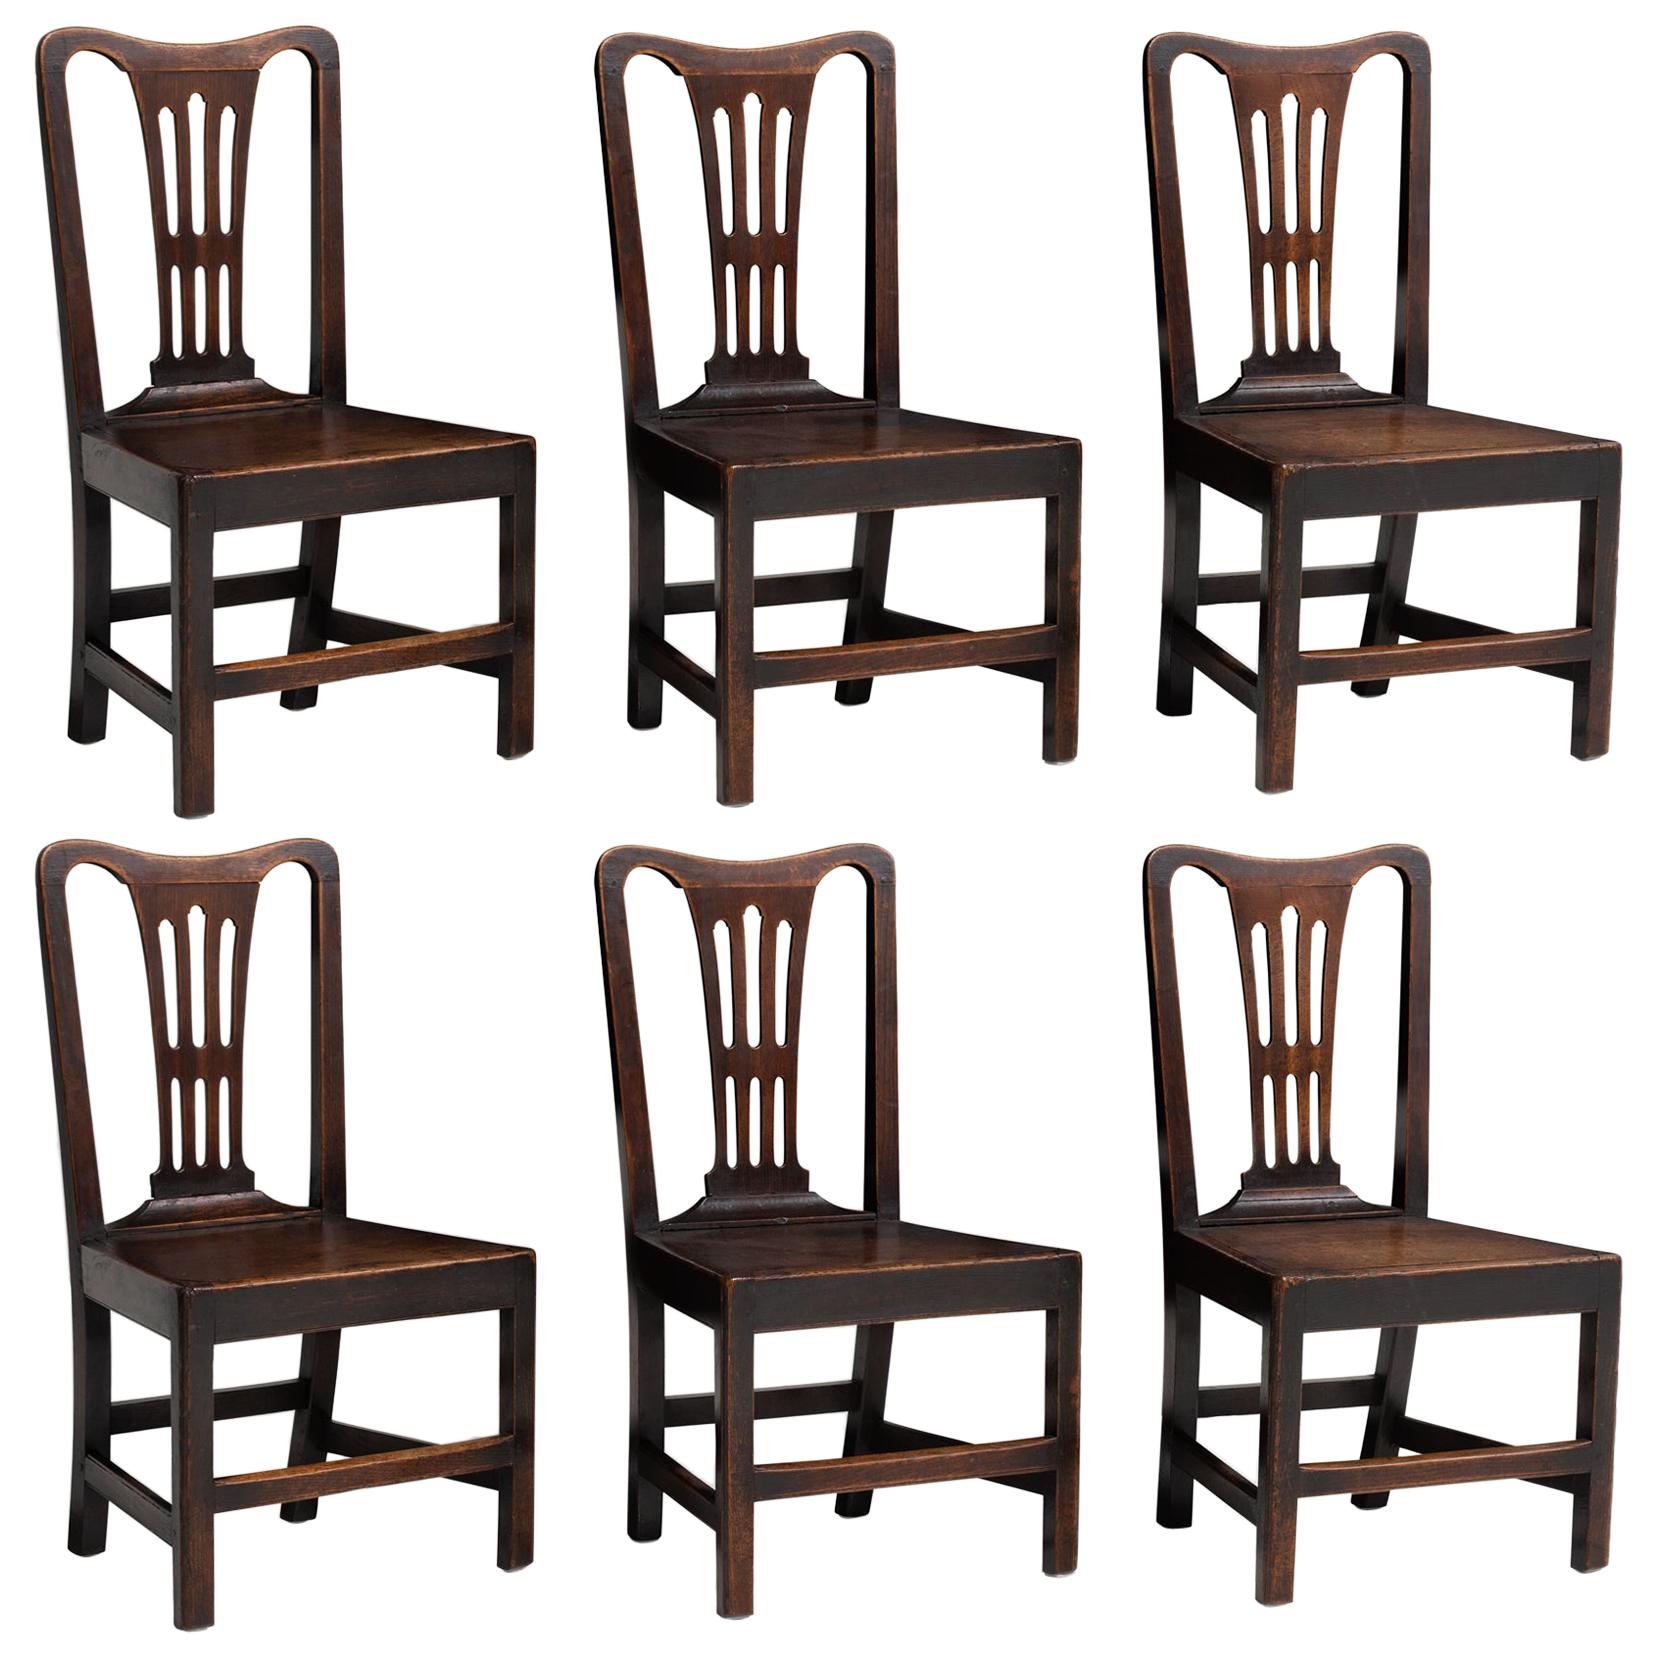 Set of '6' Oak Dining Chairs